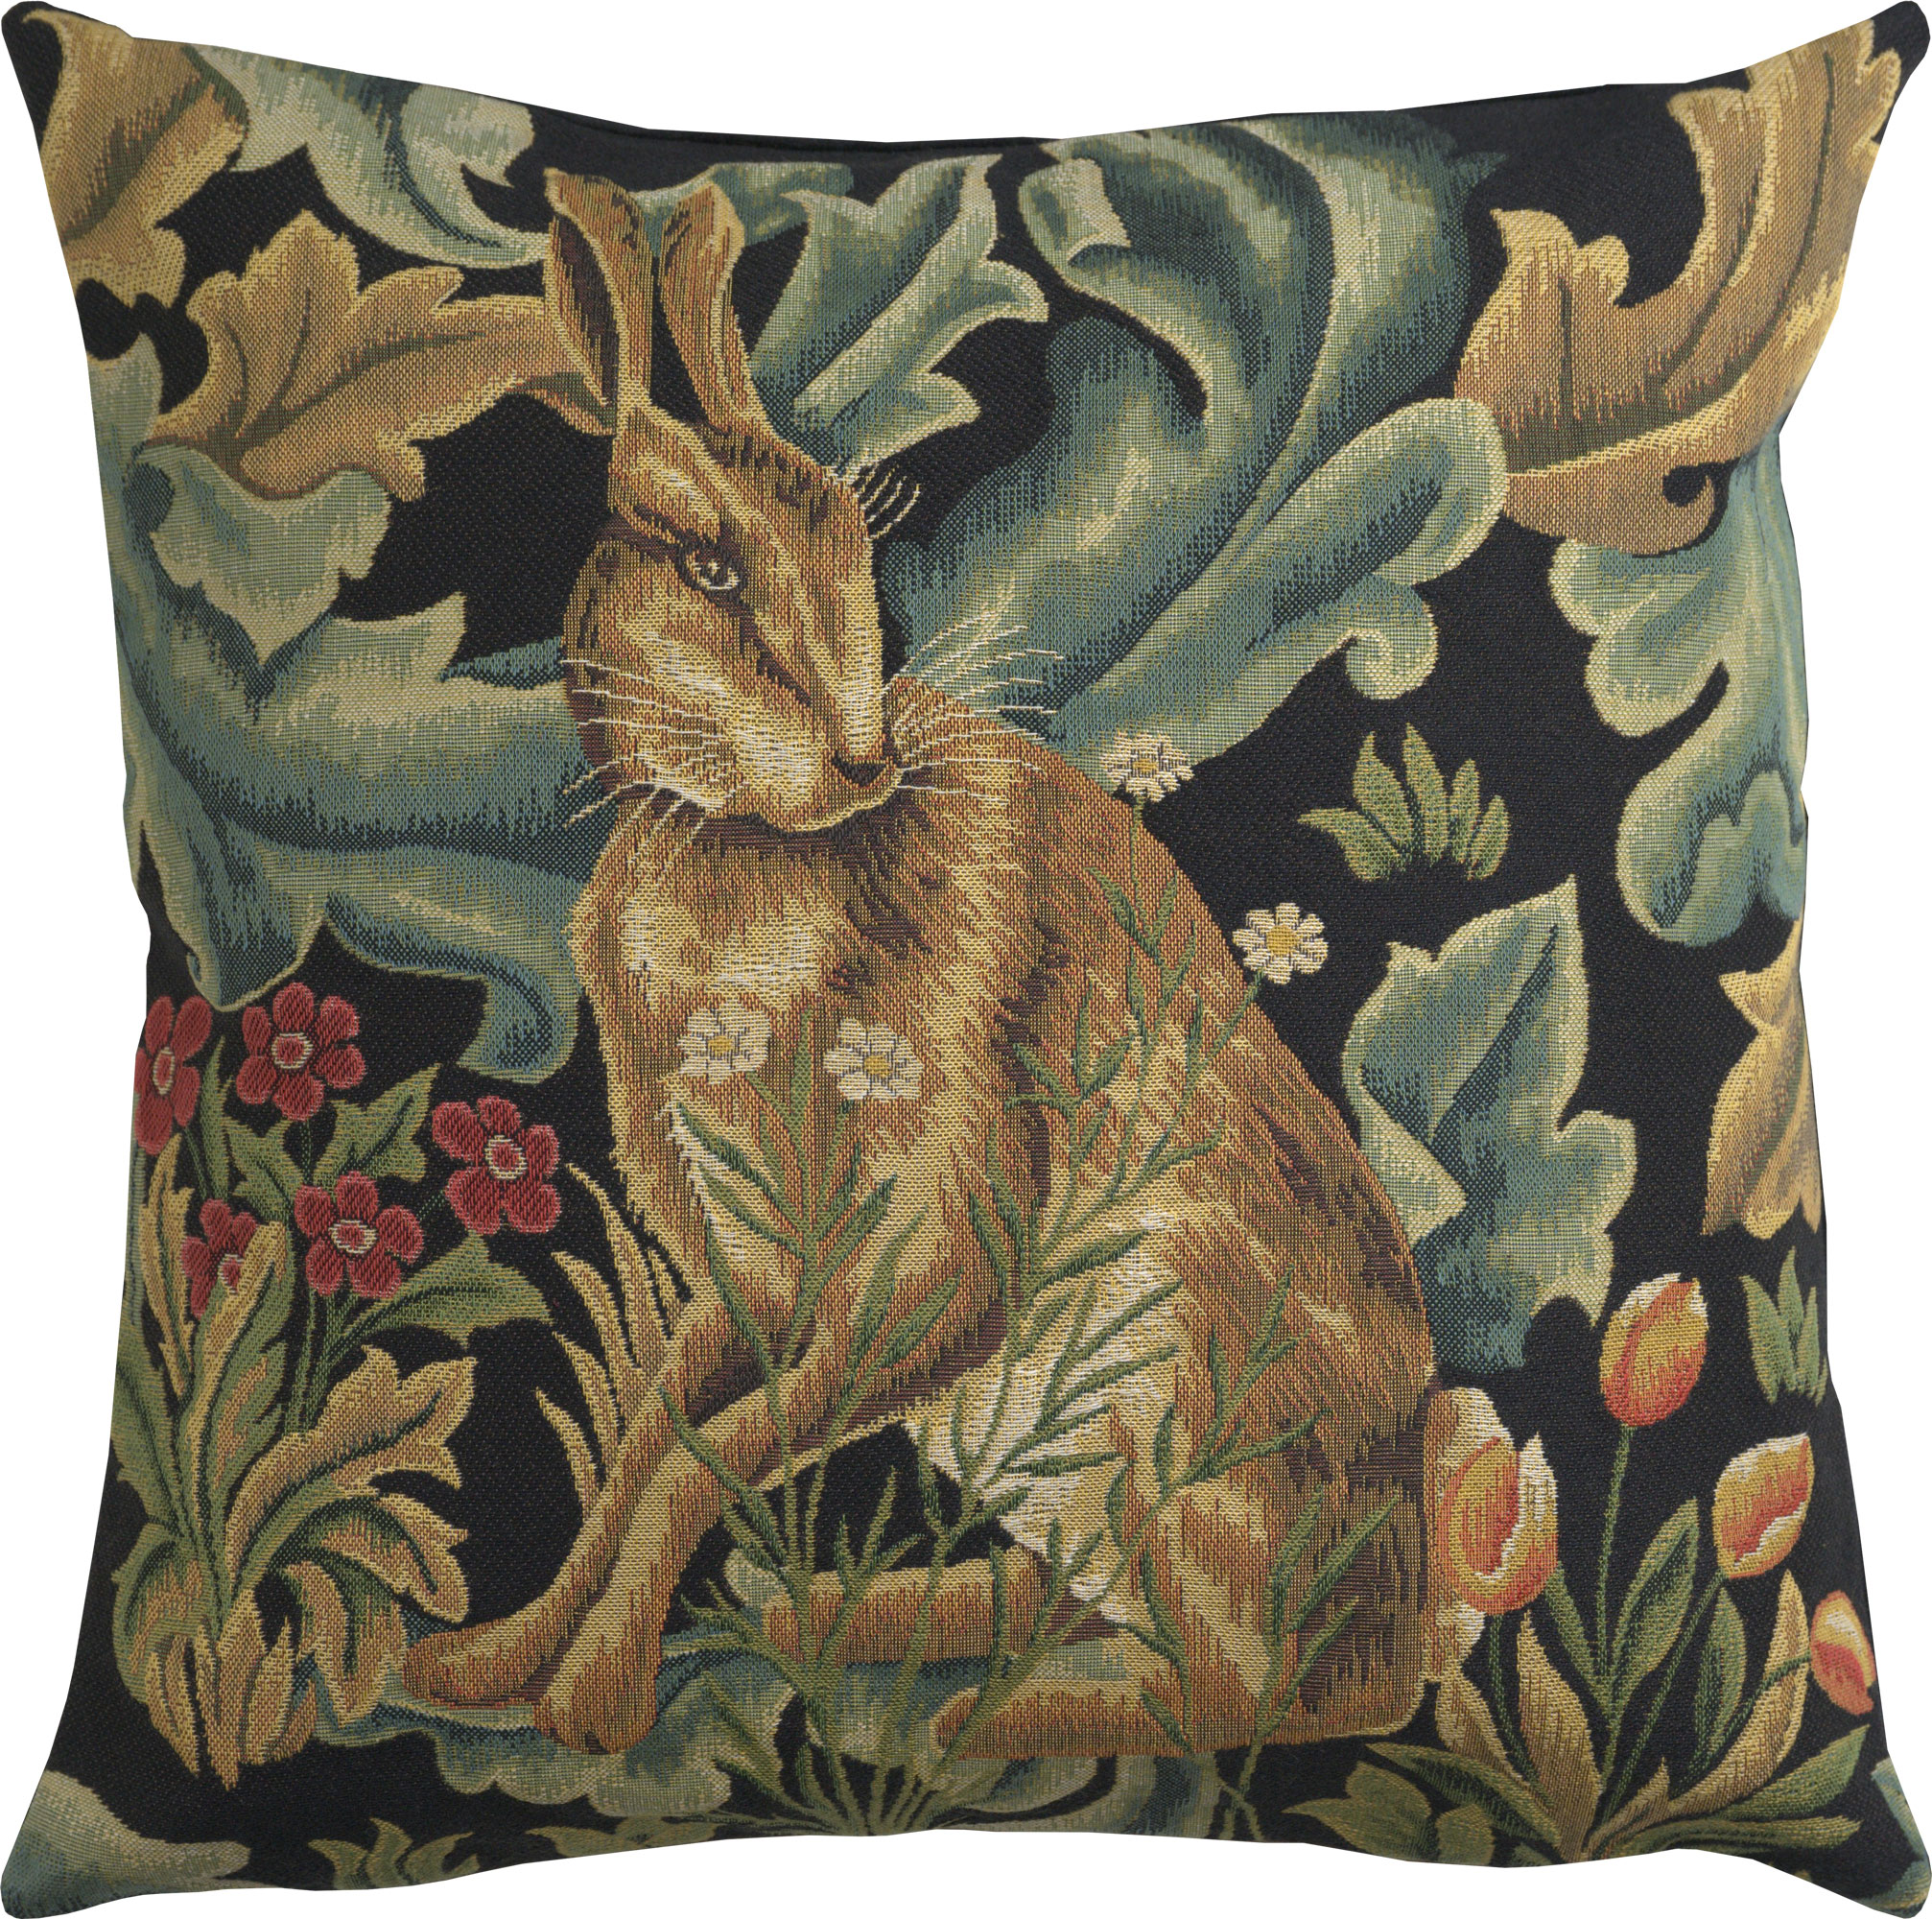 Belgium Woven 18x18 in Hare Cushion Cover by Artist William Morris Gift New